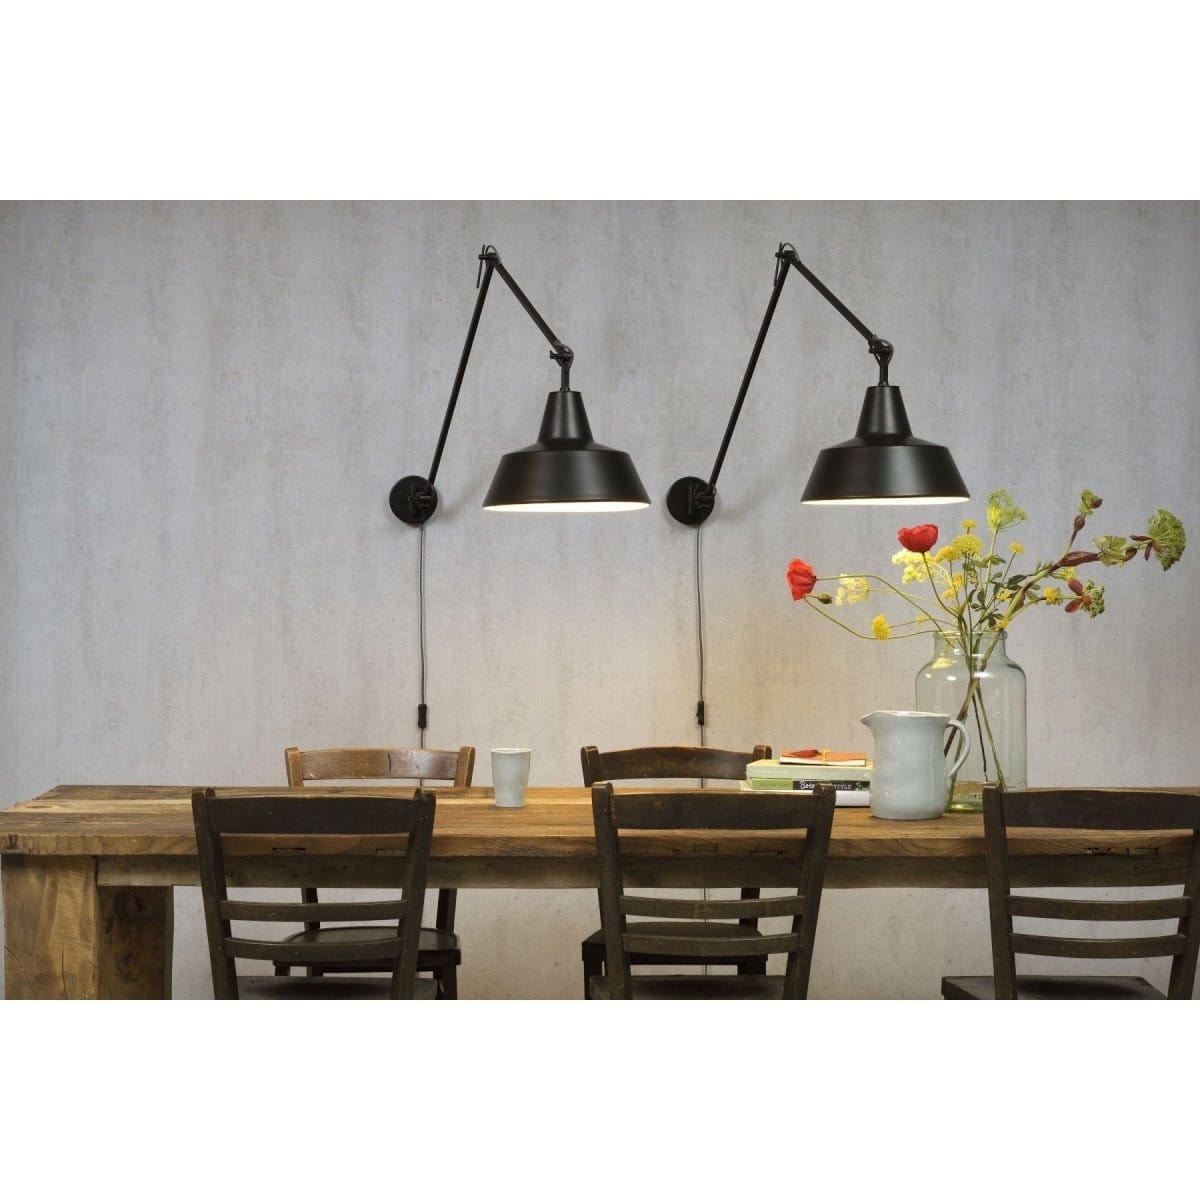 It's About RoMi Wall Lights Chicago Wall Light, black, grey green or white